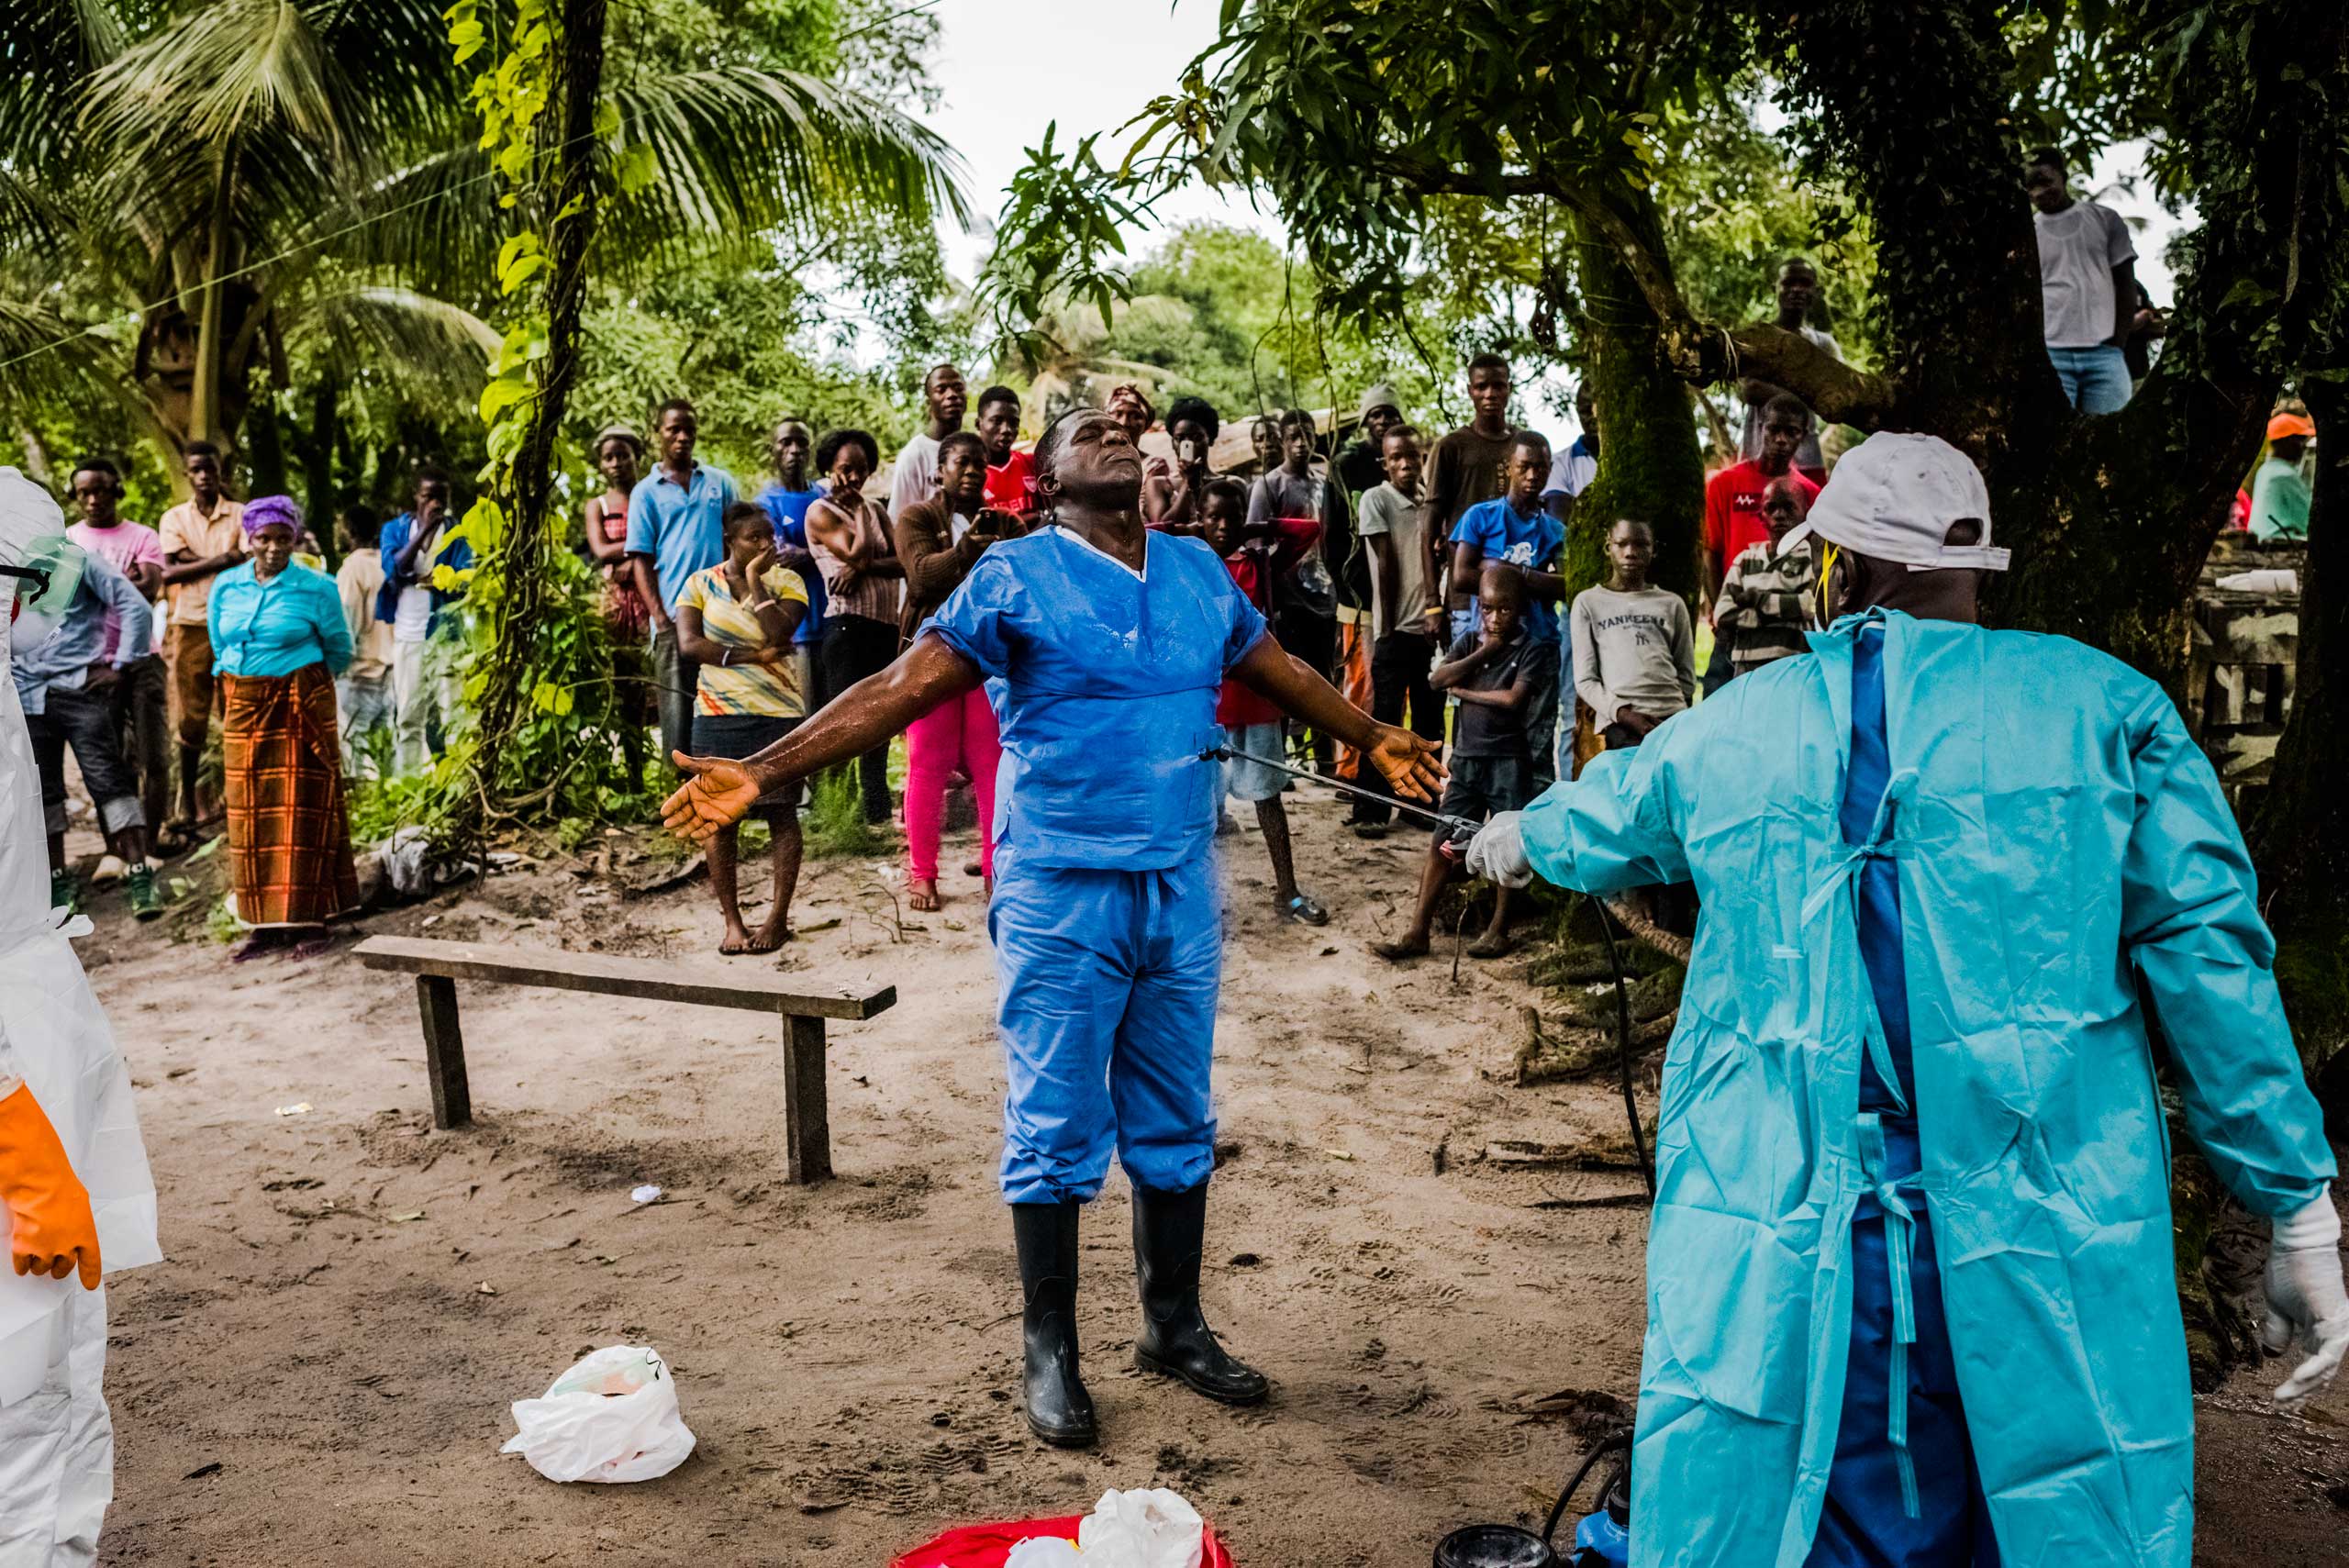 A member of a Liberian Red Cross burial team is disinfected, with chlorine sprayed on by a colleague, after having  removed the body of a man, a suspected Ebola victim, on Sept. 6, 2014 in Monrovia, Liberia.